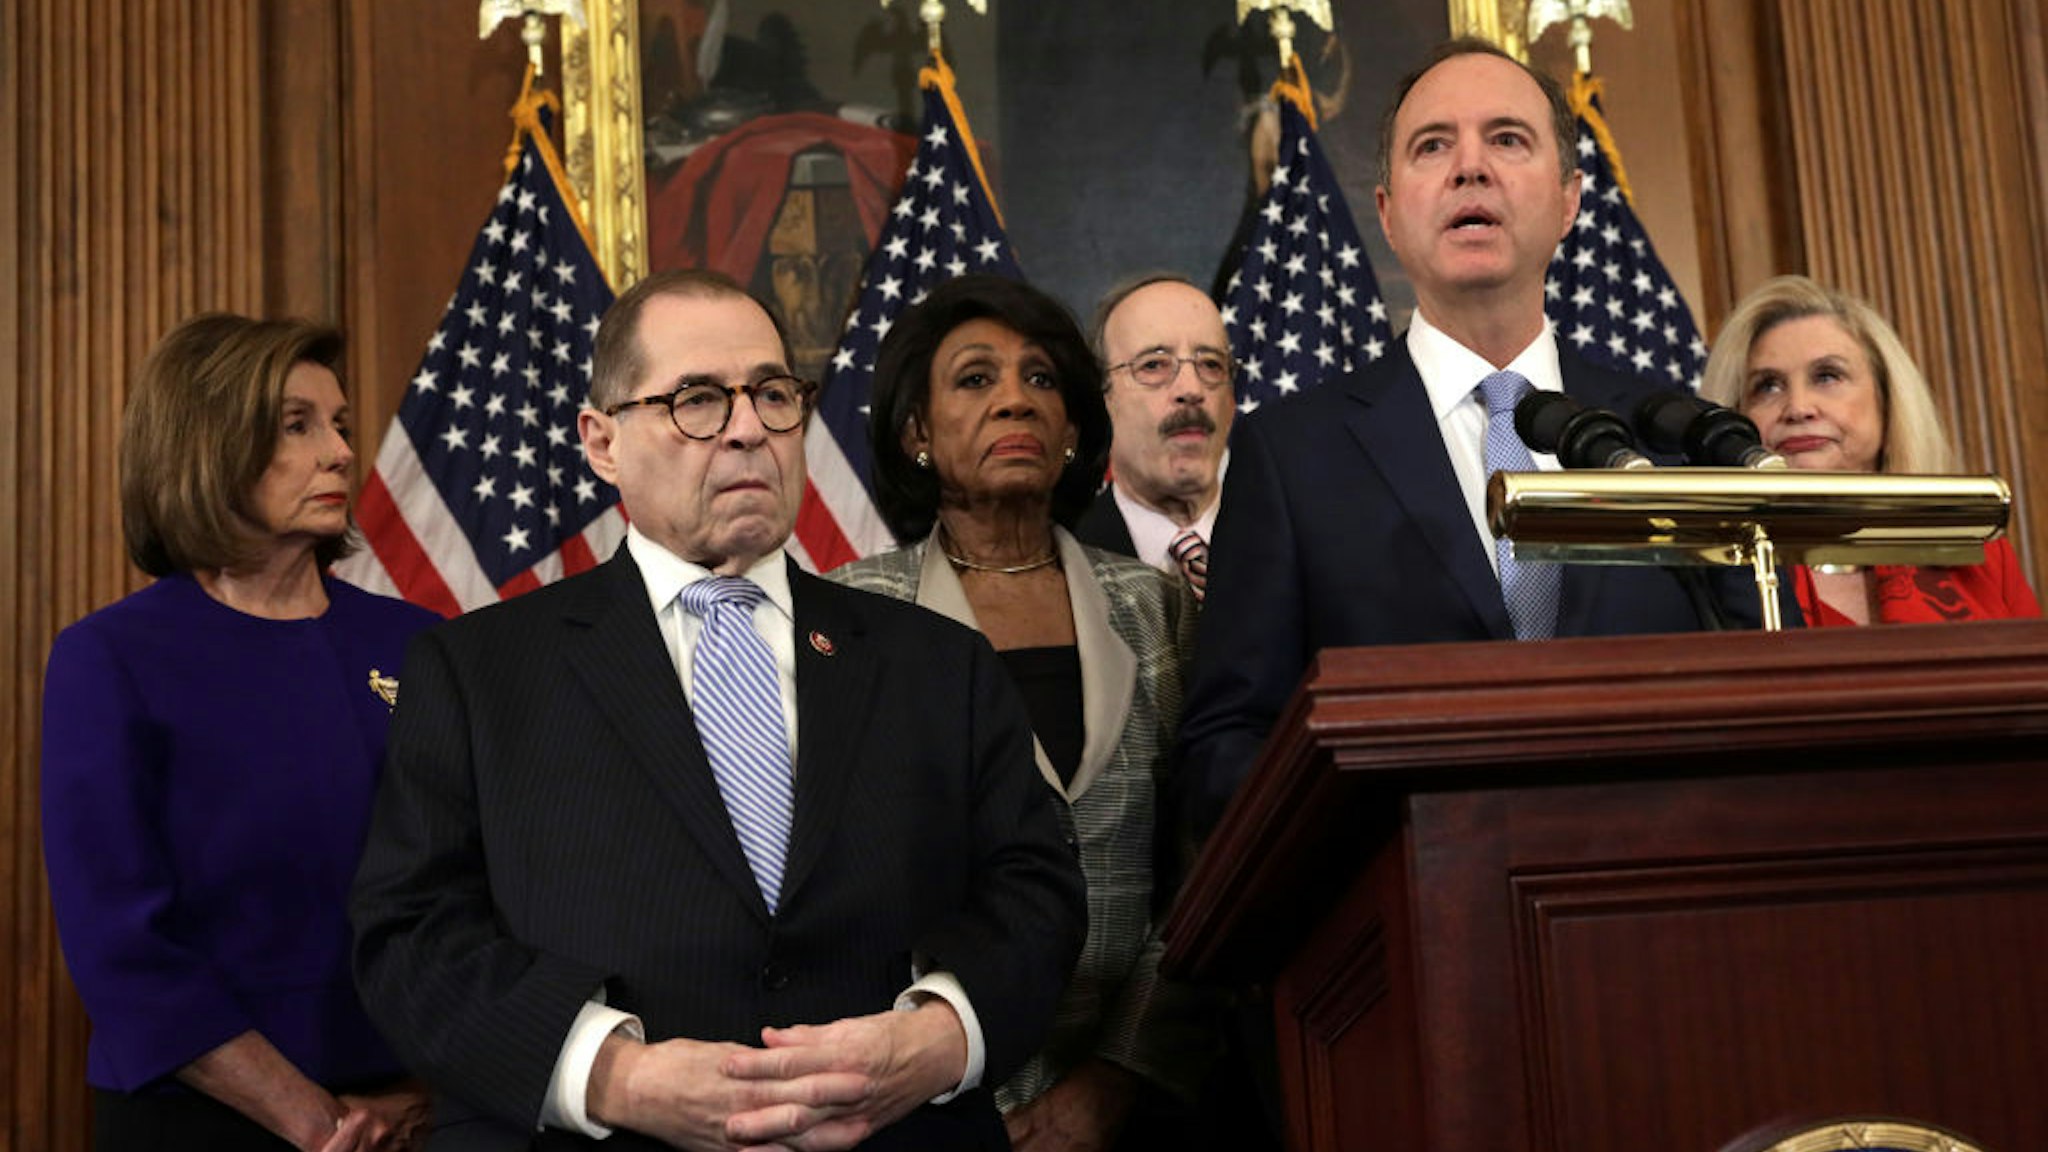 WASHINGTON, DC - DECEMBER 10: Chairman of House Intelligence Committee Rep. Adam Schiff (D-CA) (5th L) speaks as (L-R) Speaker of the House Rep. Nancy Pelosi (D-CA), Chairman of House Judiciary Committee Rep. Jerry Nadler (D-NY), Chairwoman of House Financial Services Committee Rep. Maxine Waters (D-CA), Chairman of House Foreign Affairs Committee Rep. Eliot Engel (D-NY) and Chairwoman of House Oversight and Reform Committee Rep. Carolyn Maloney (D-NY) listen during a news conference at the U.S. Capitol December 10, 2019 in Washington, DC.